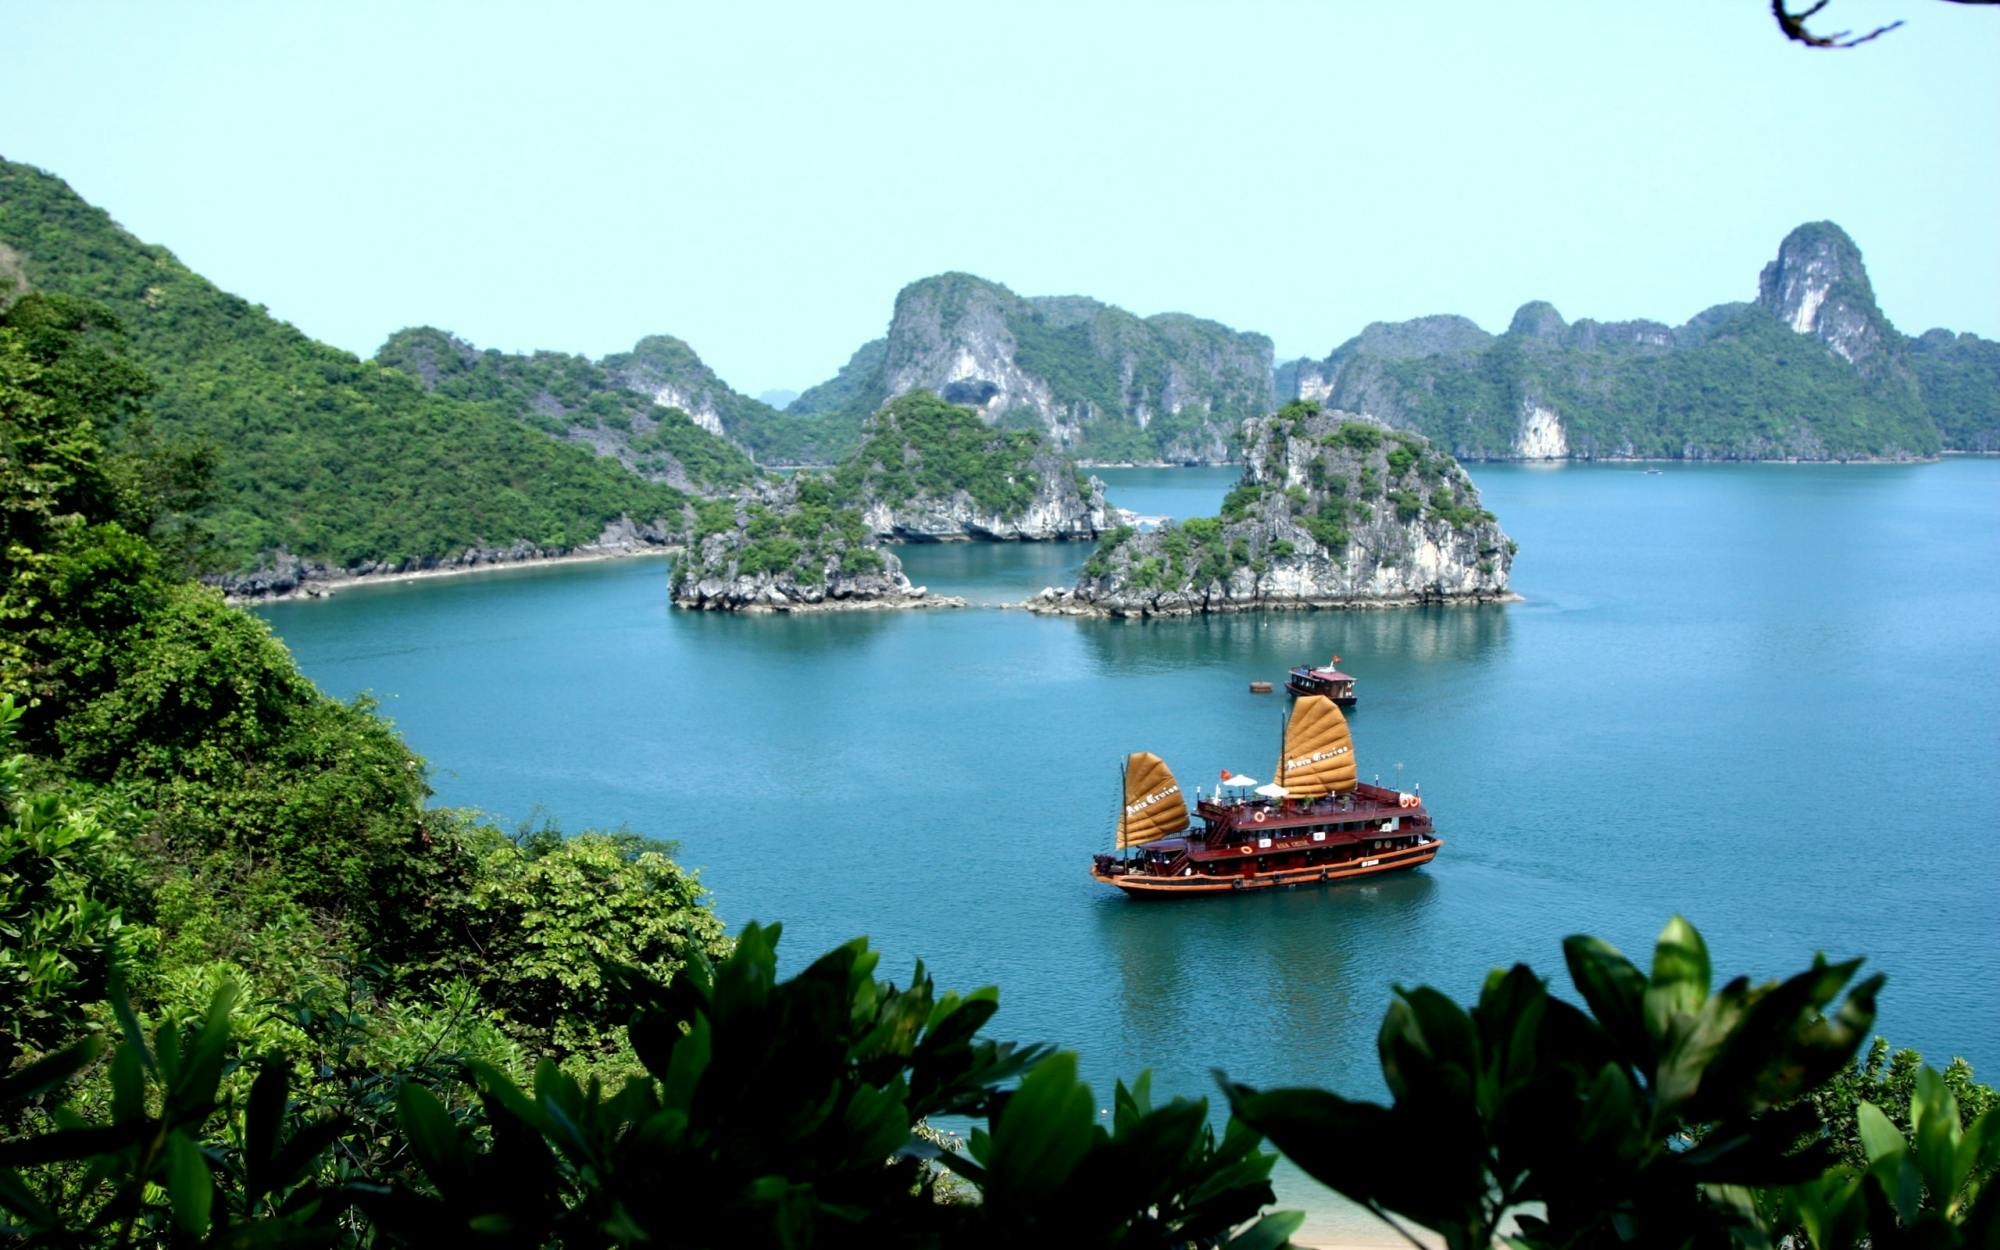 Halong Bay 3 days and 2 nights on boat cruise from Hanoi